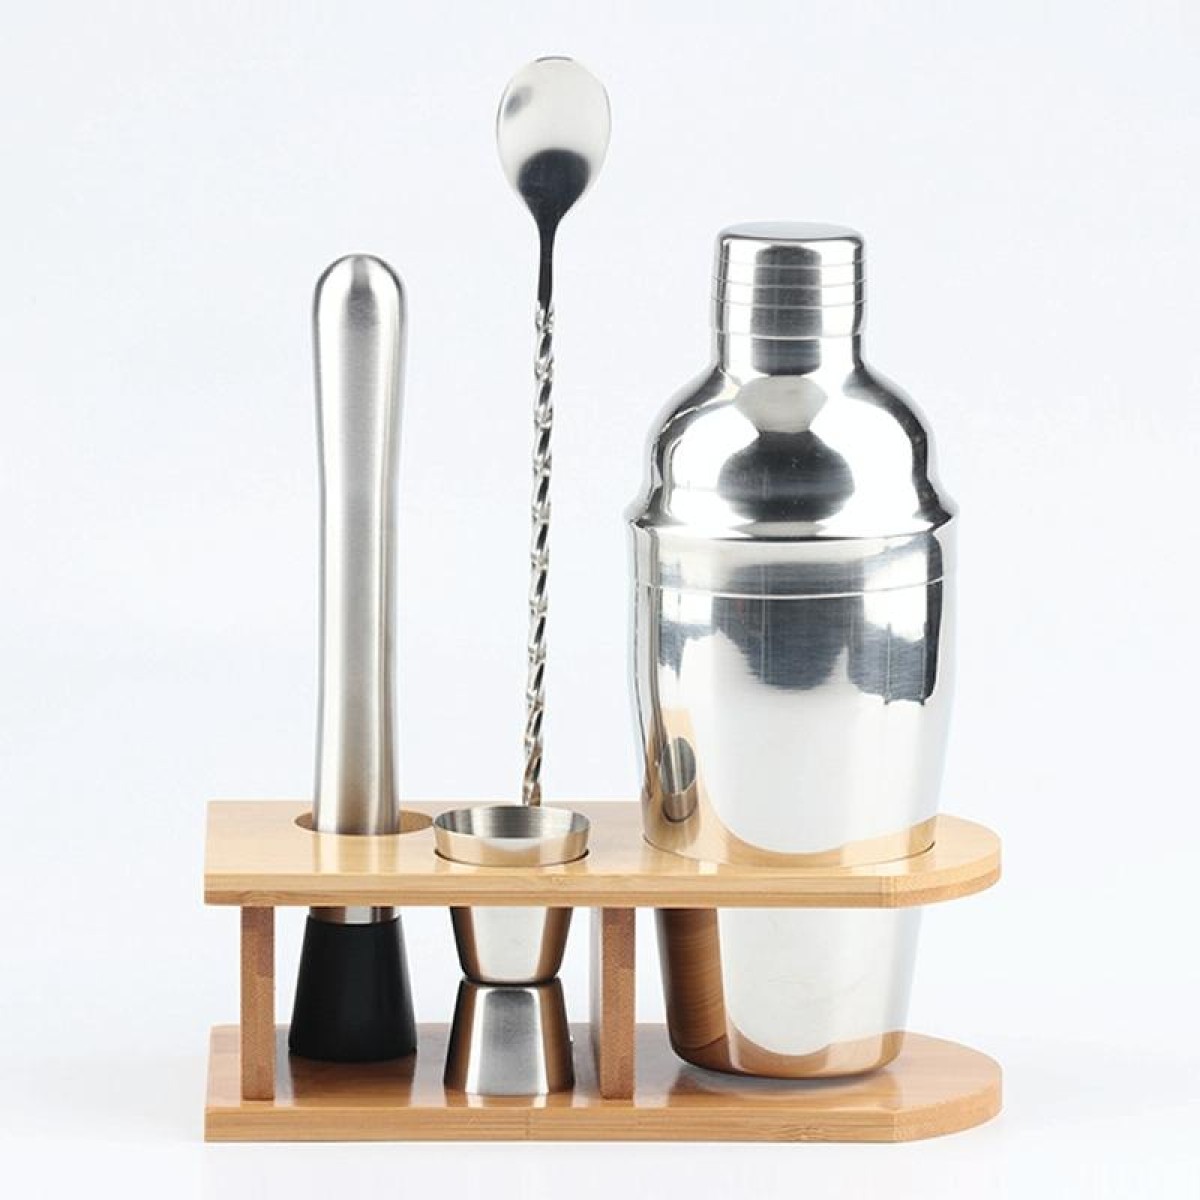 550ml 4 In 1 Stainless Steel Mixer Set With Bamboo Stand Shaker Tools